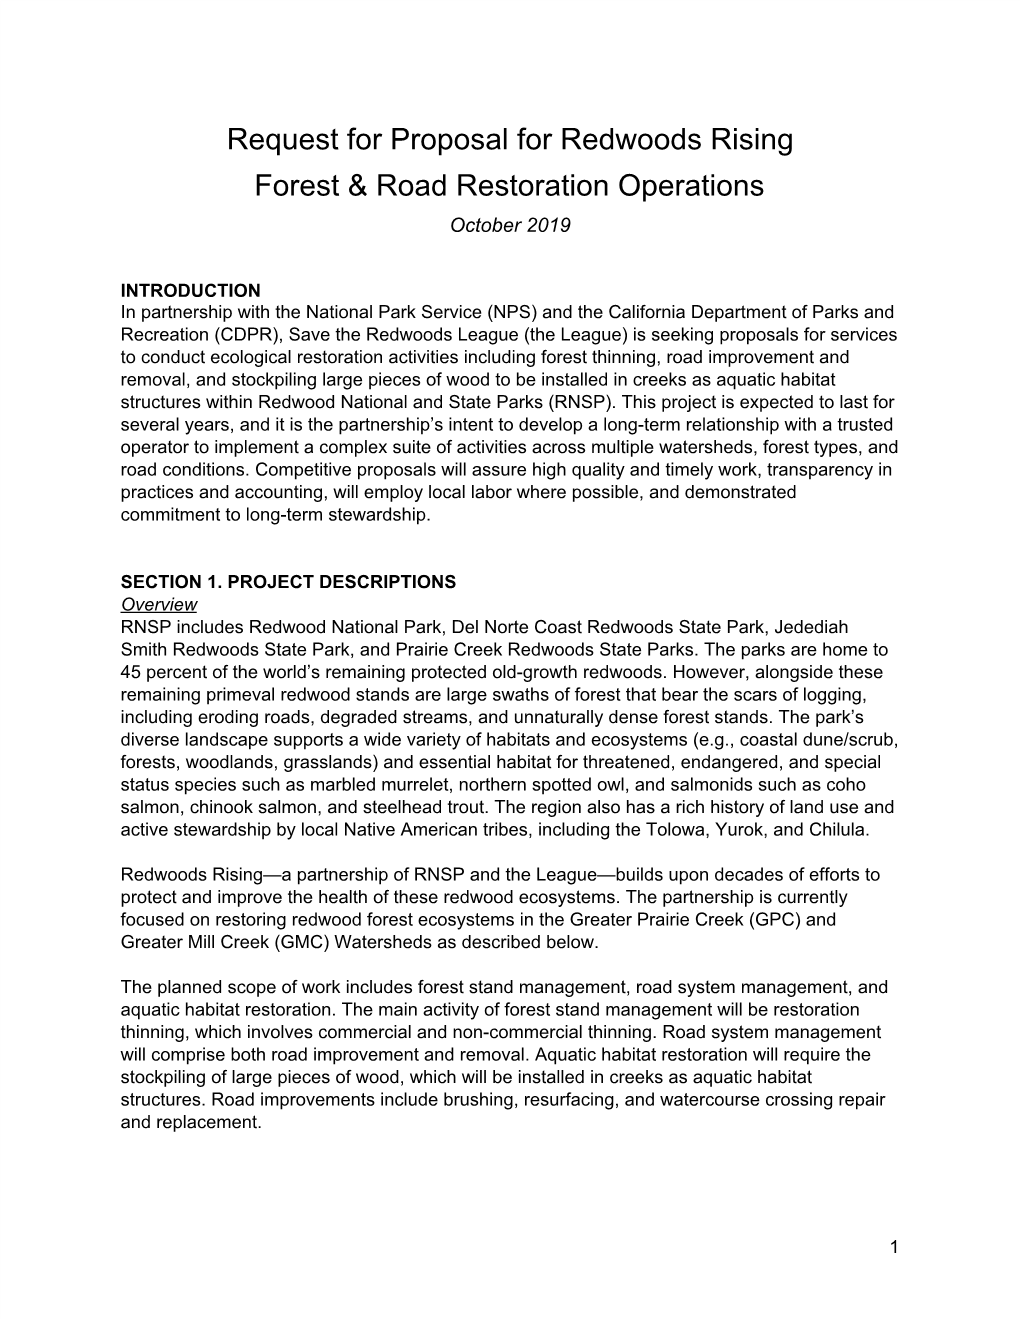 Request for Proposal for Redwoods Rising Forest & Road Restoration